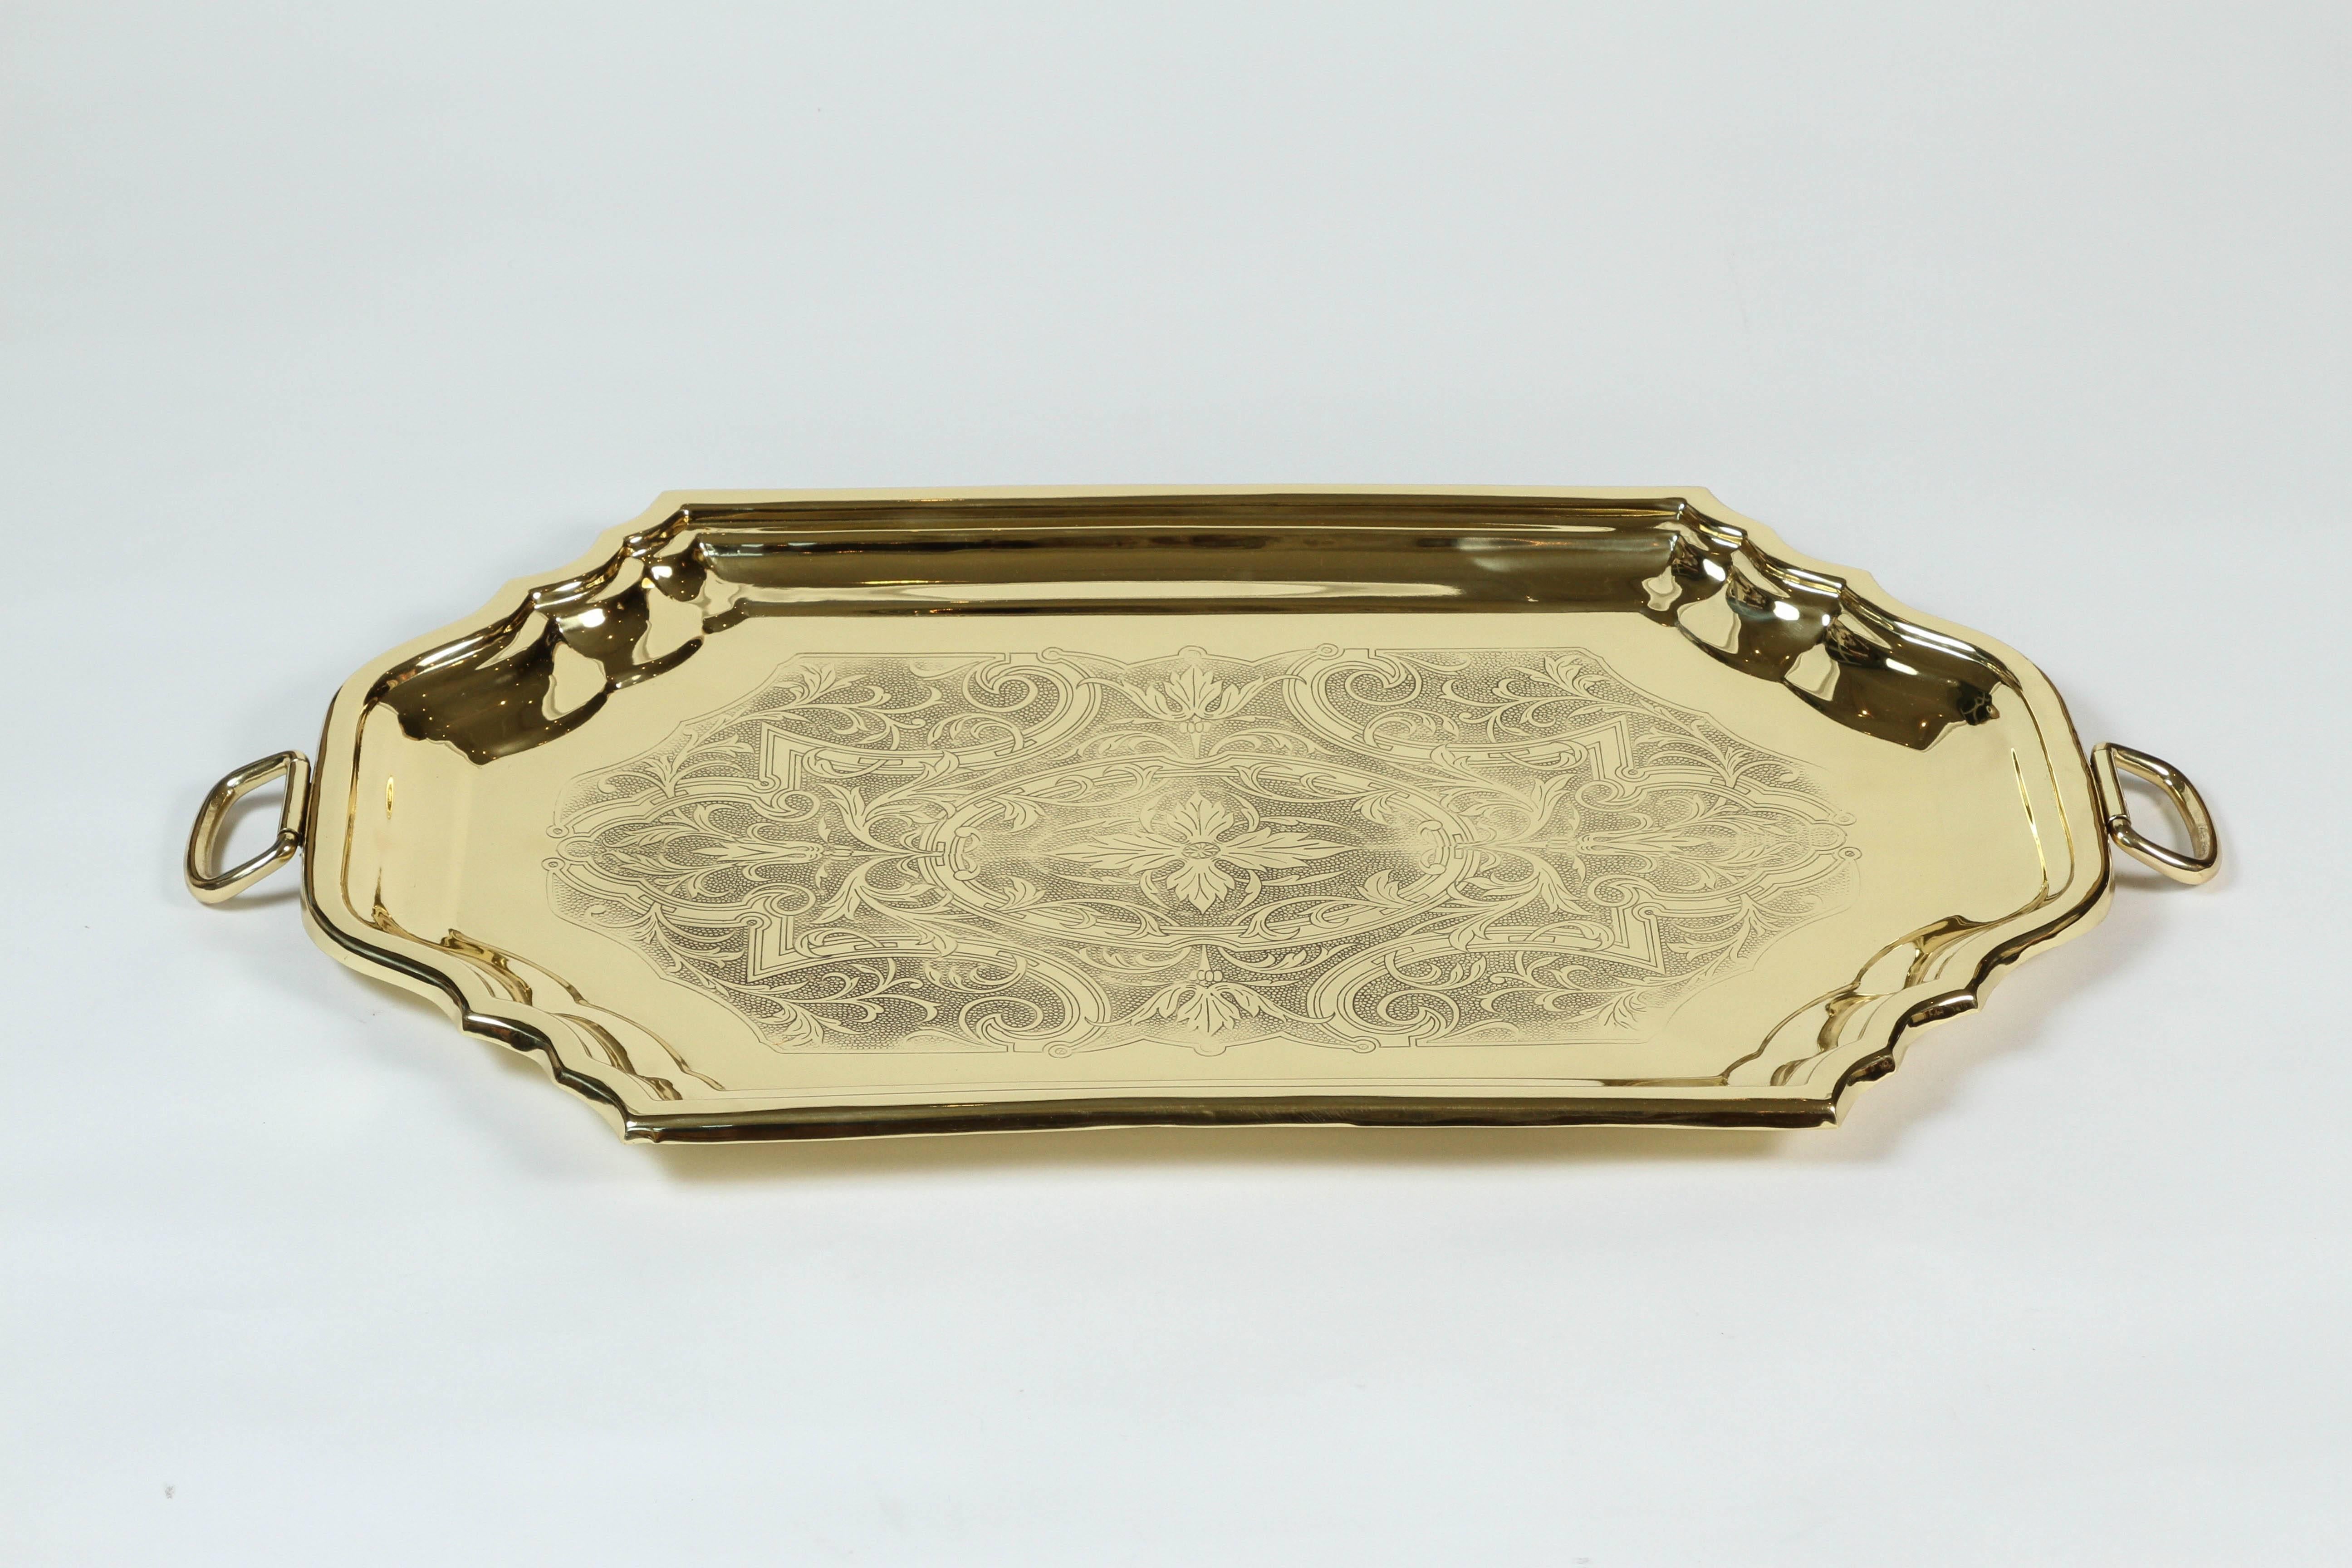 Newly polished vintage brass serving tray with engraved floral design and handles.